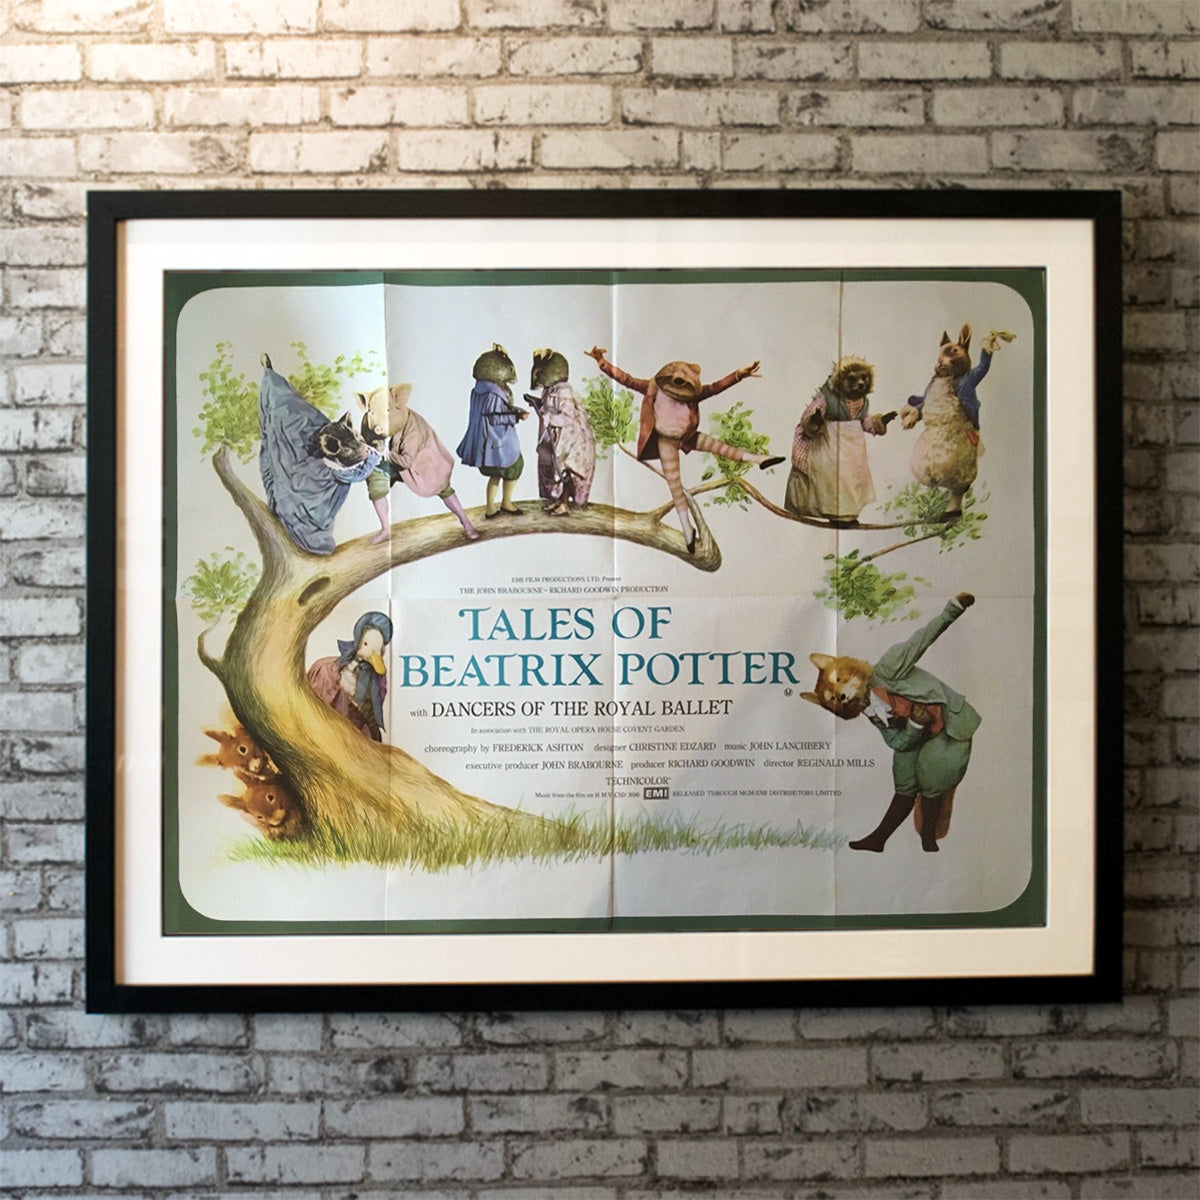 Tales of Beatrix Potter, The Ballet Poster (1992)